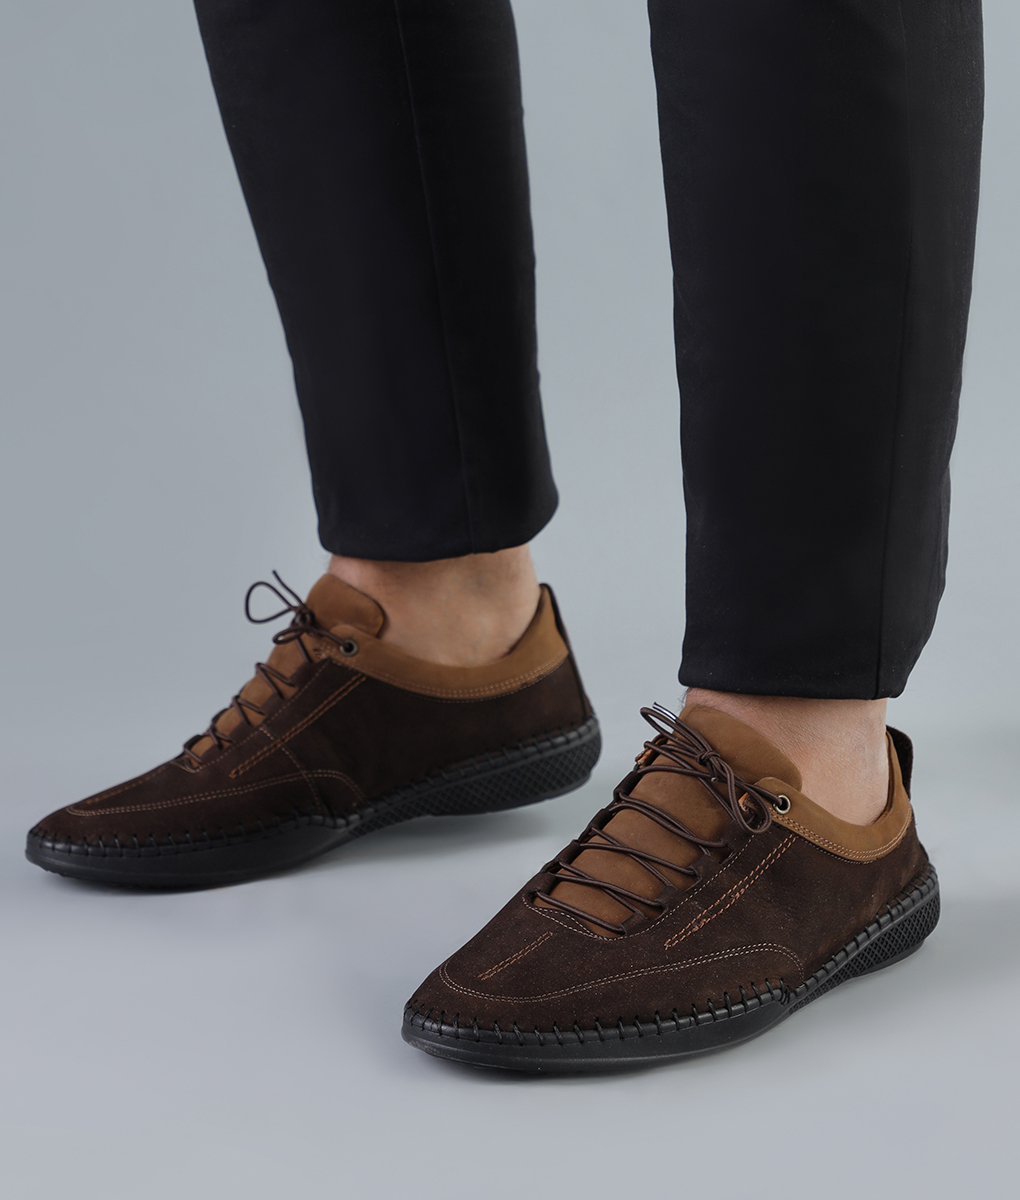 Men's Handcrafted Brown Suede Leather Shoes